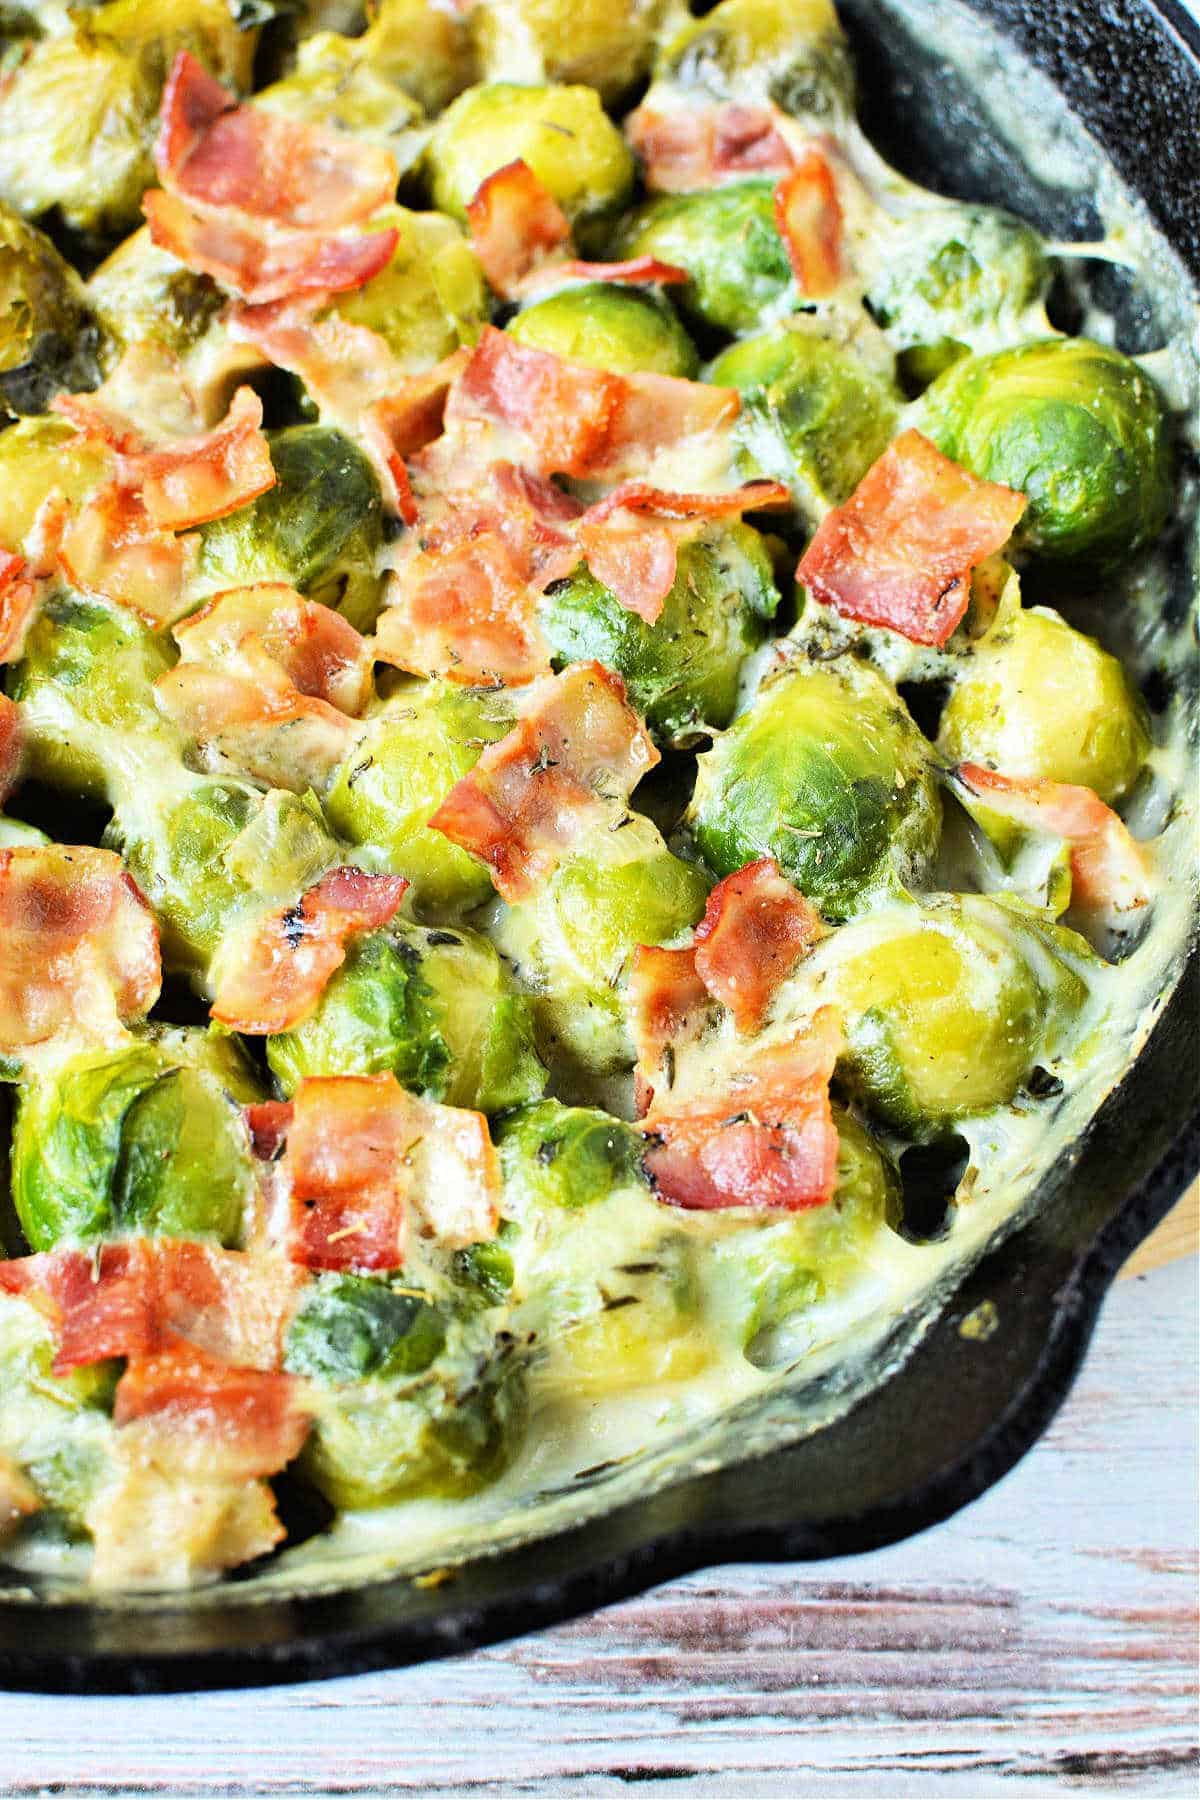 Brussel sprouts cooked in a cast iron skillet served as a side.